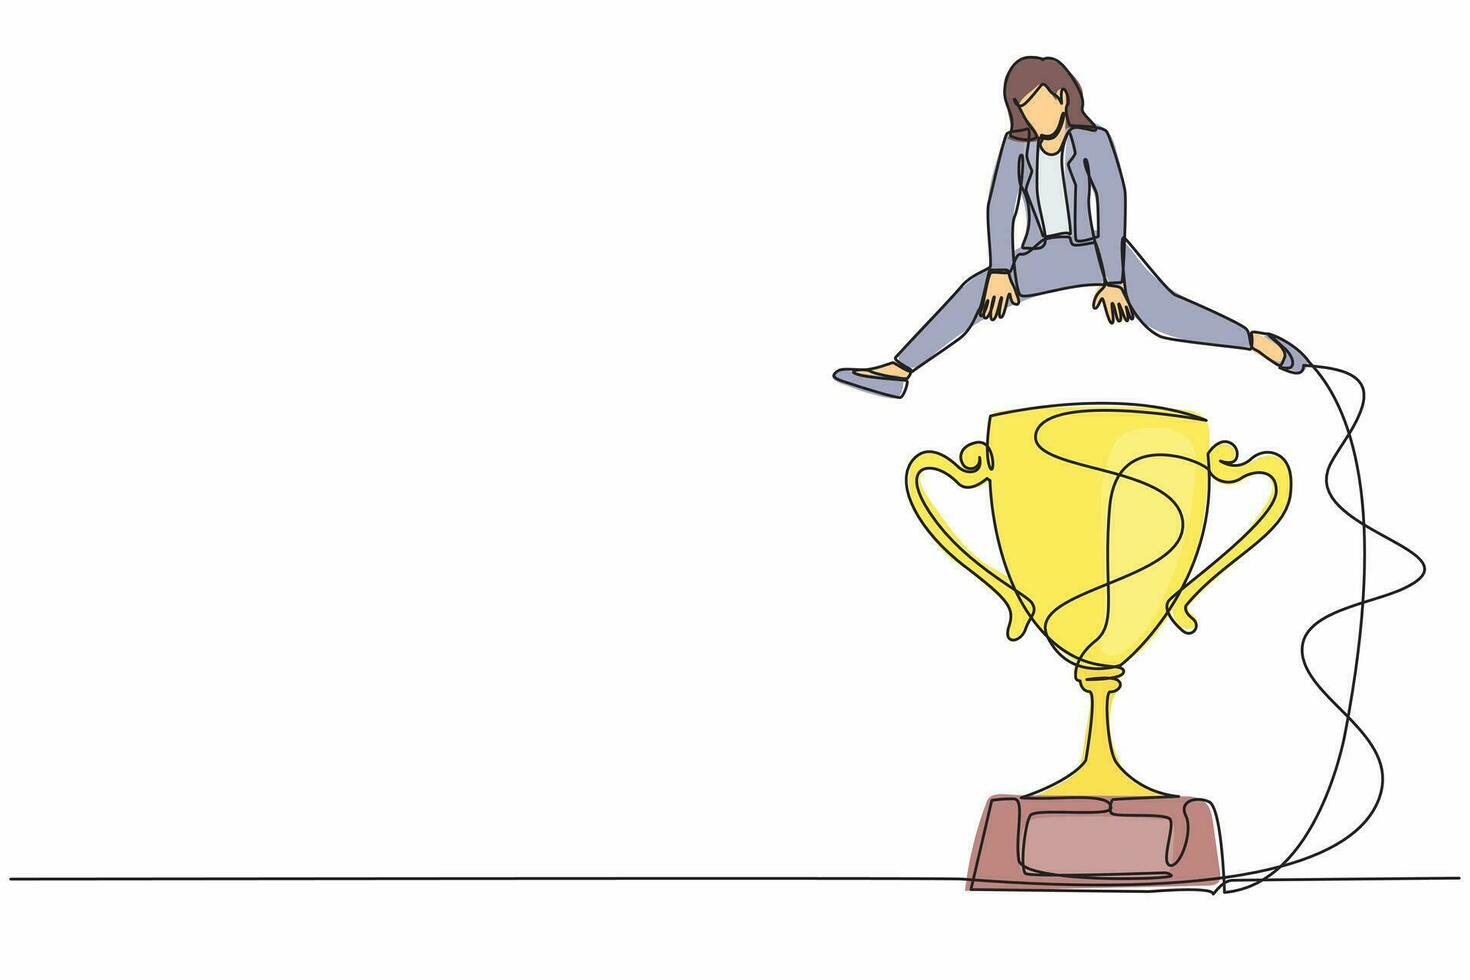 Single one line drawing businesswoman jumping over big trophy. Celebrate work achievement, success or victory. Challenge or succeed in business competition. Continuous line design vector illustration